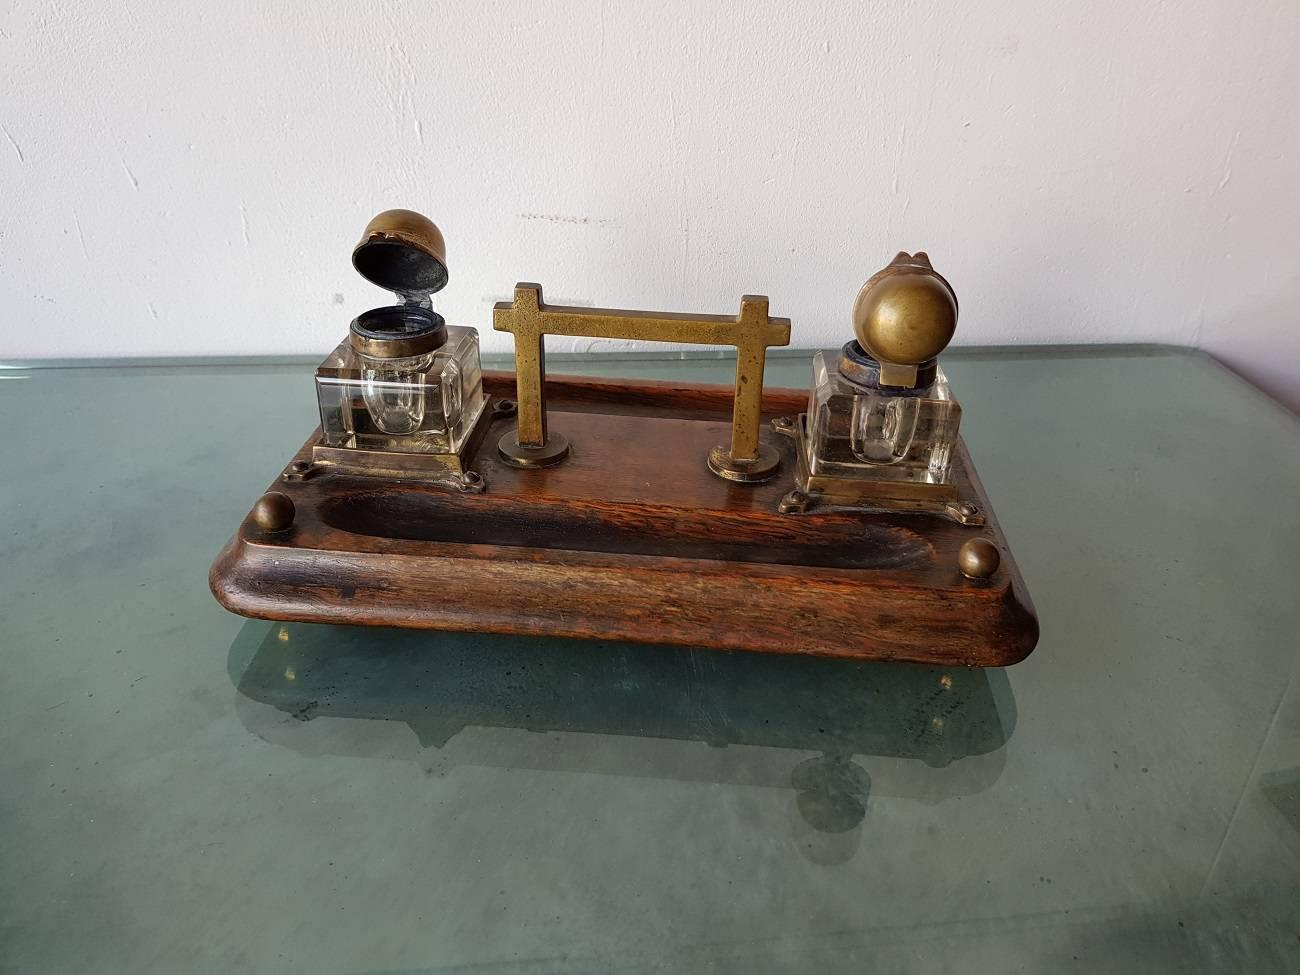 Lovely designed 19th century wooden inkstand or inkwell with glass ink pots and decorated with bronze elemants.

The measurements are:
Depth 17 cm/ 6.6 inch.
Width 28 cm/ 11 inch.
Height 10 cm/ 3.9 inch.
 